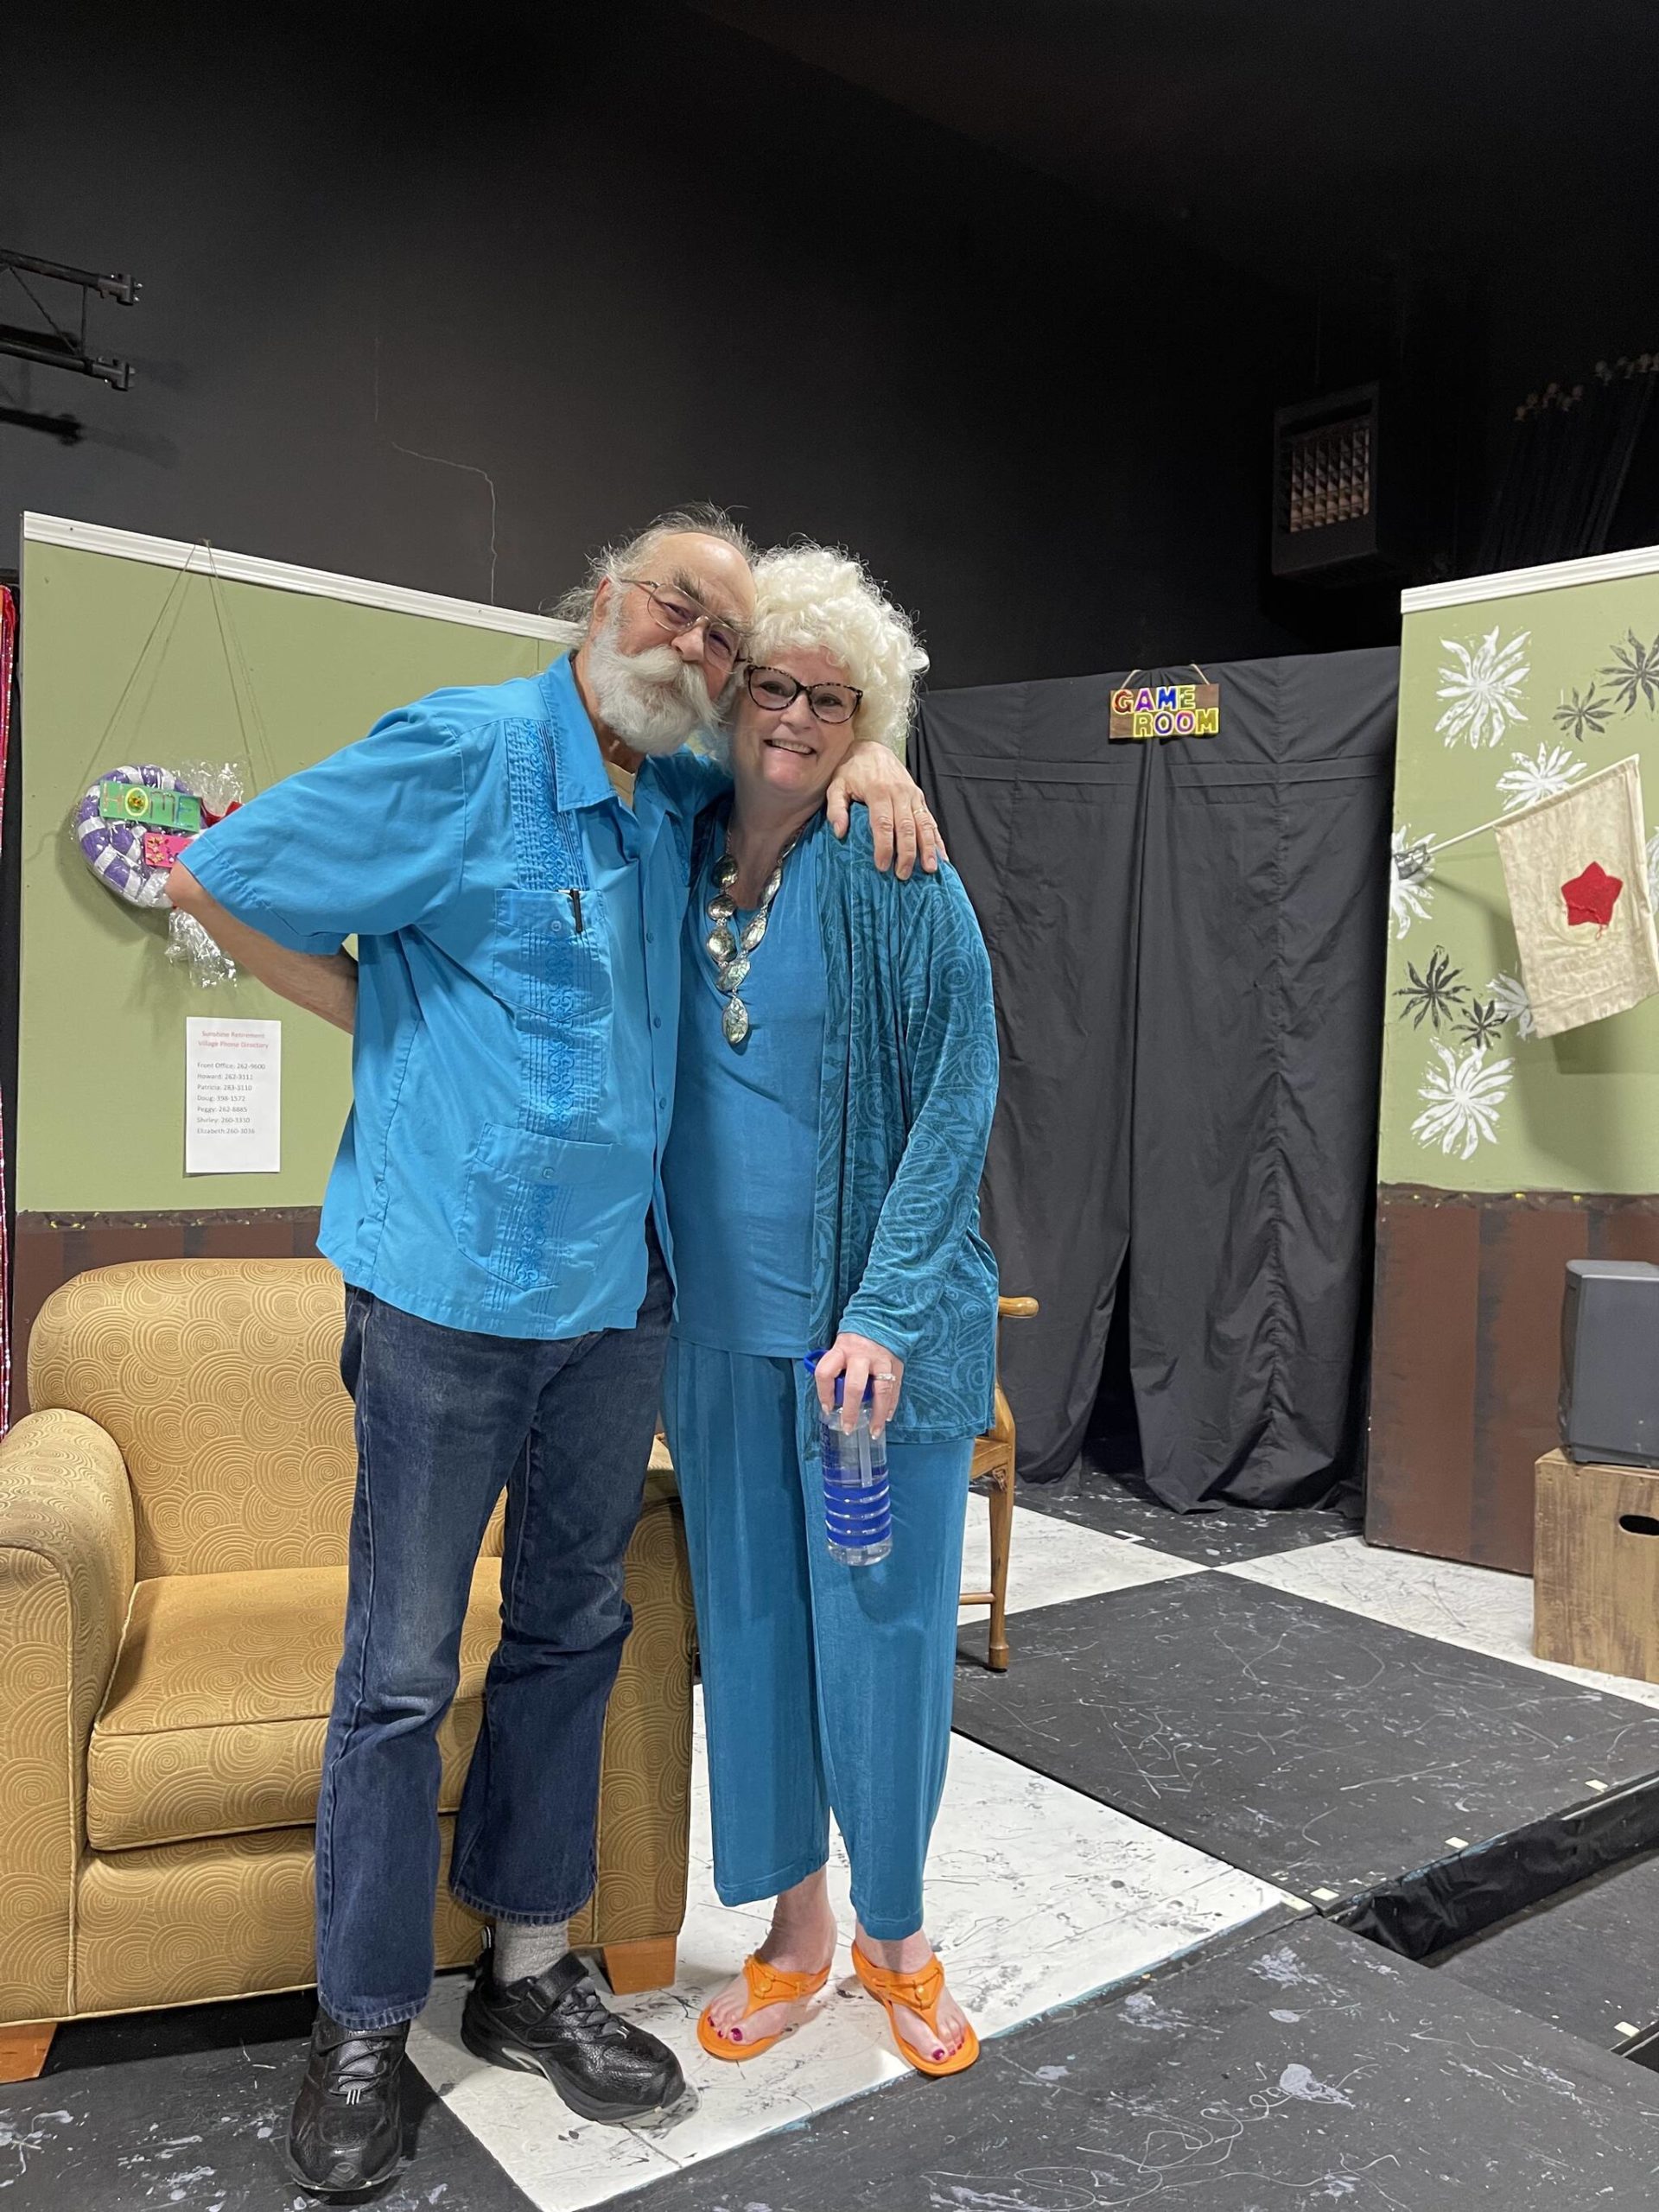 Allen Auxier and Chriss Erwin perform in the Kenai Performers production “The Old People Are Revolting” on Tuesday, Jan. 11, 2022, in Soldotna, Alaska. (Photo courtesy Donna Shirnberg)